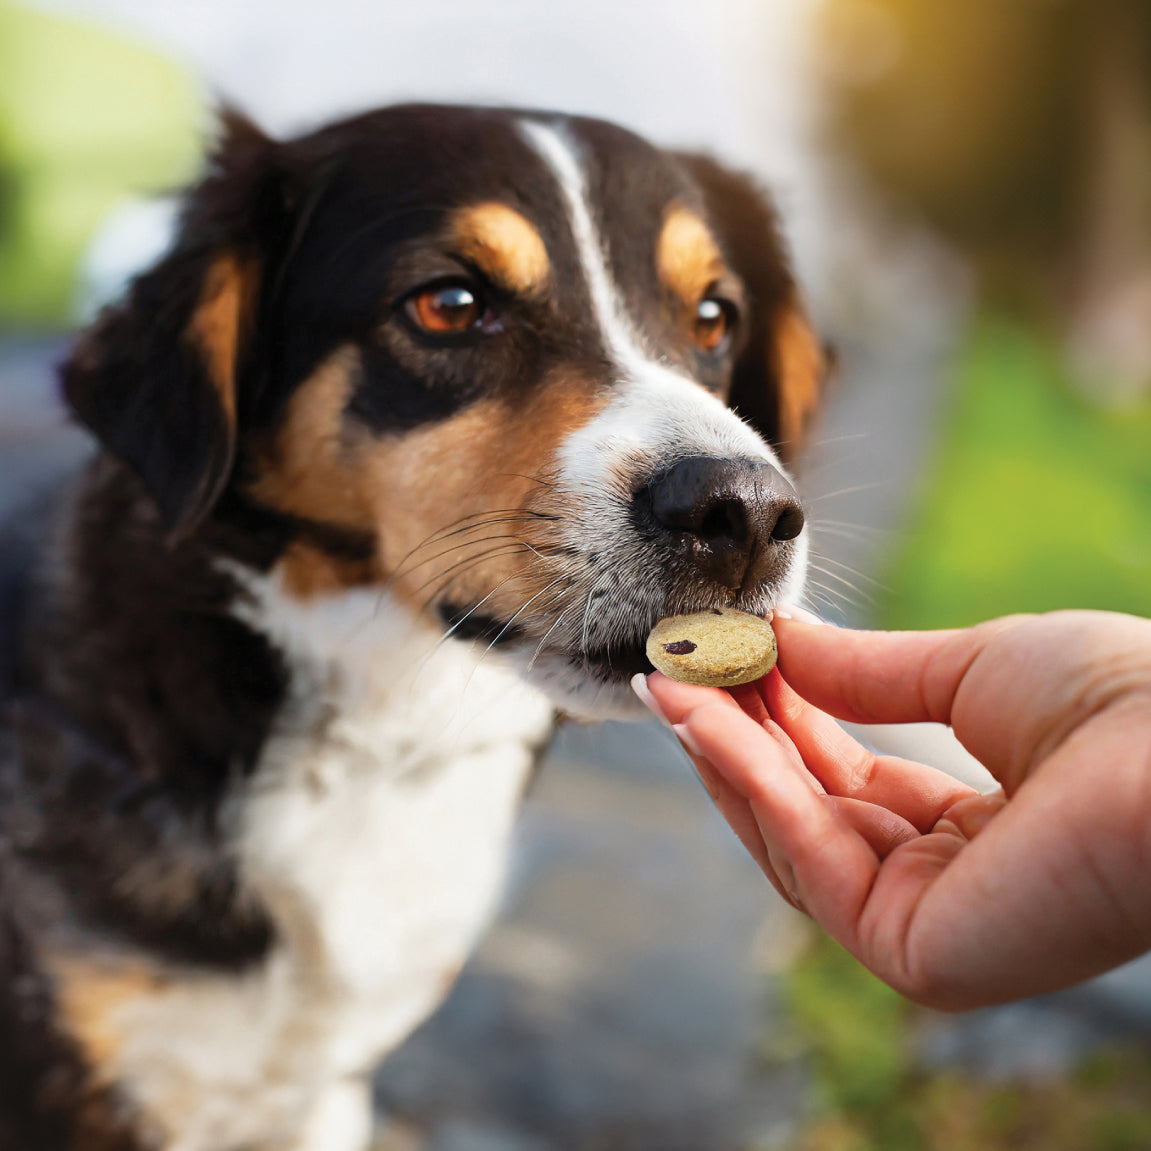 Woman's hand feeding her beagle looking mixed breed dog an Honest to Goodness plant snack treat.